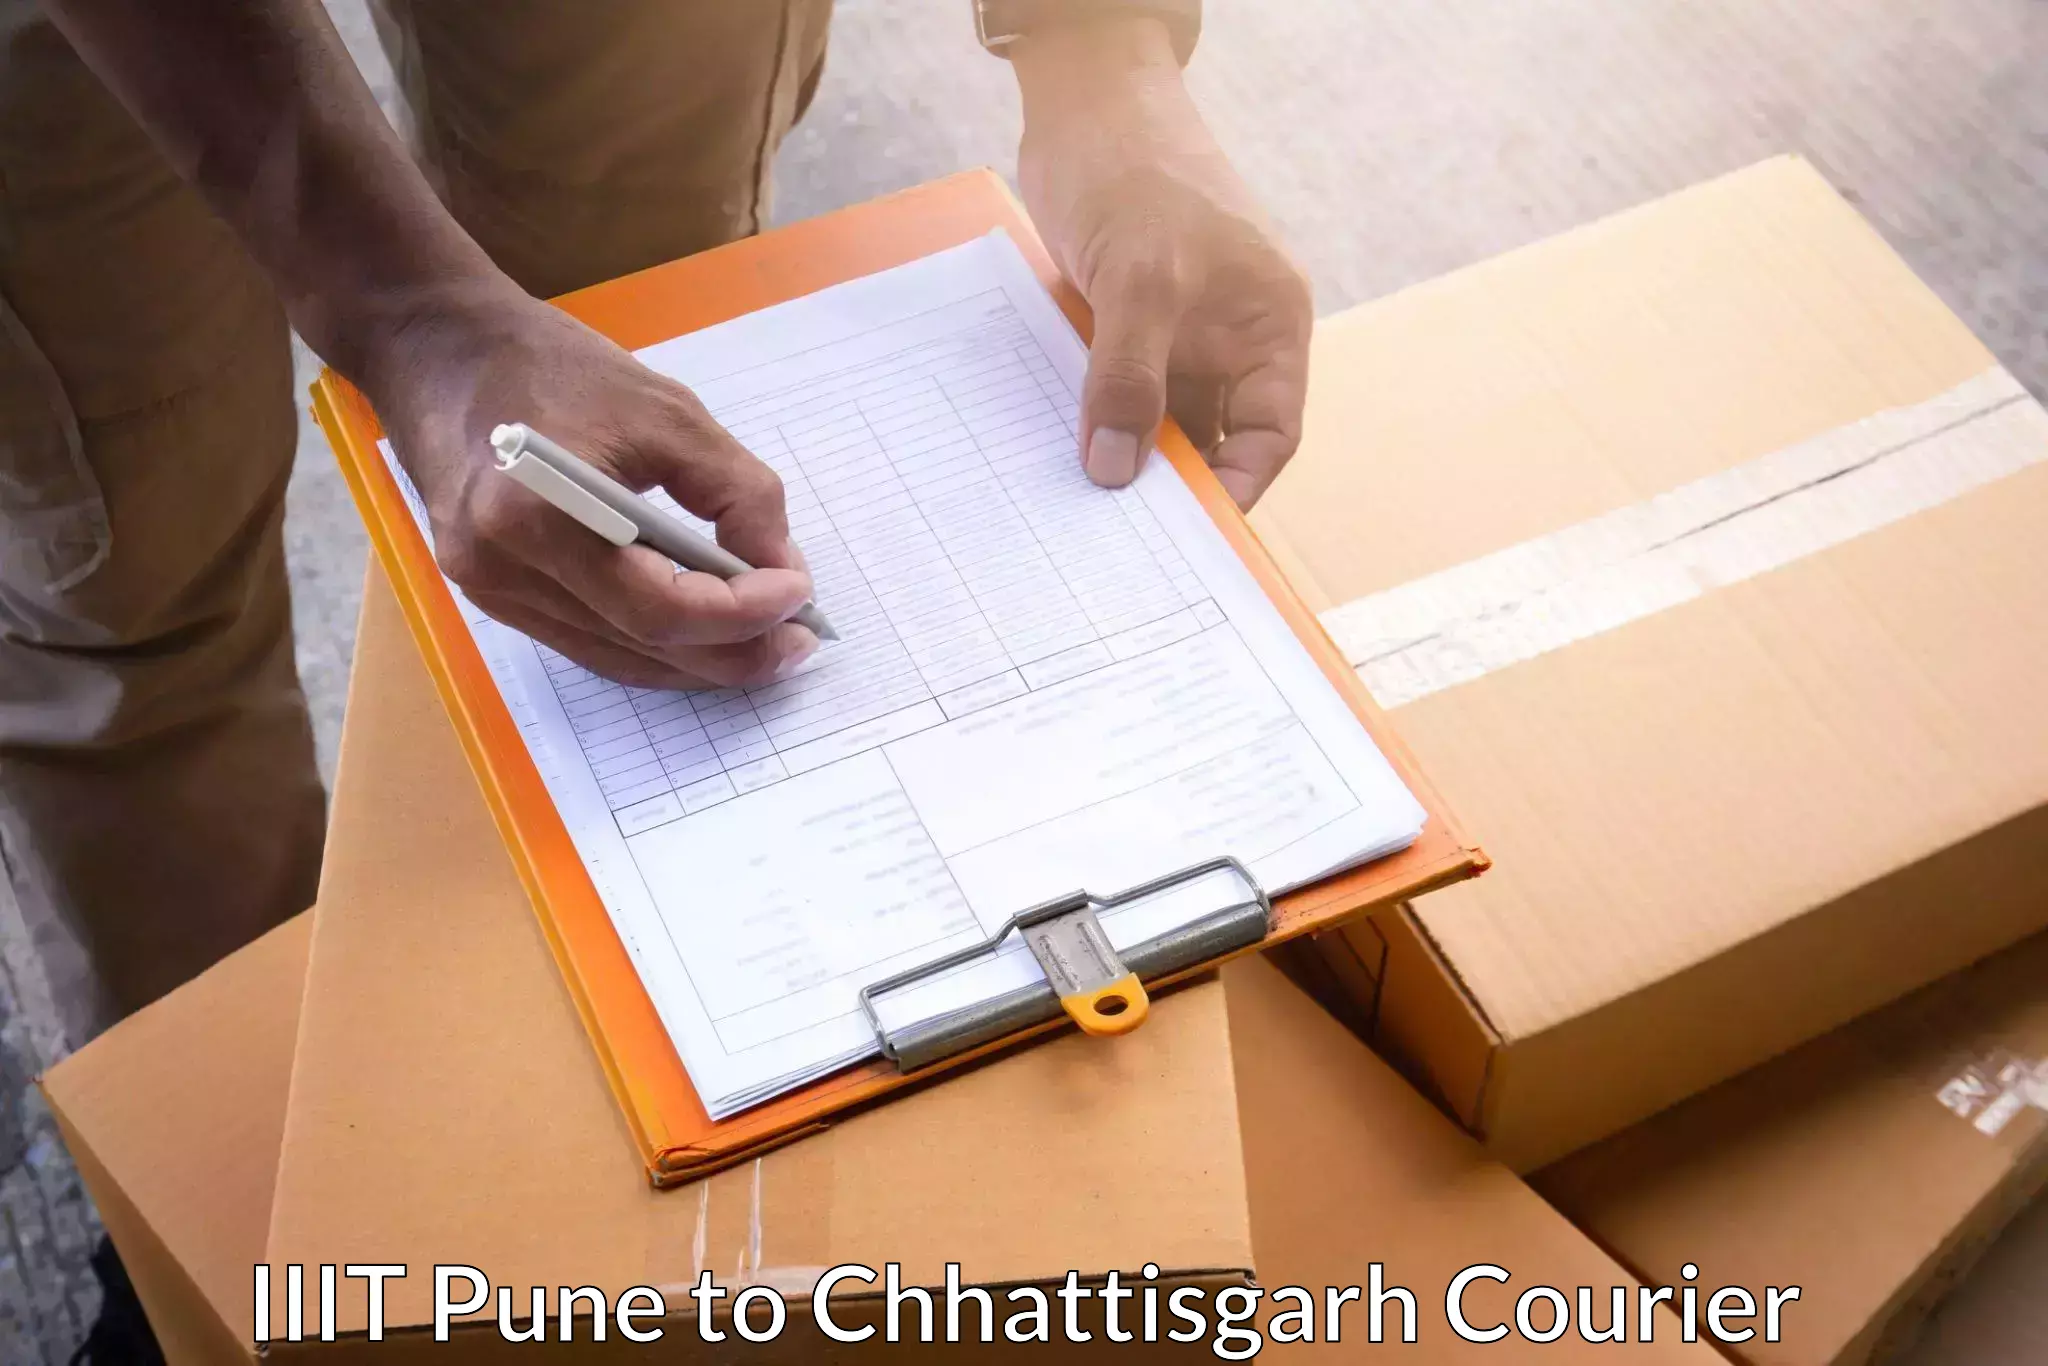 State-of-the-art courier technology IIIT Pune to Bastar